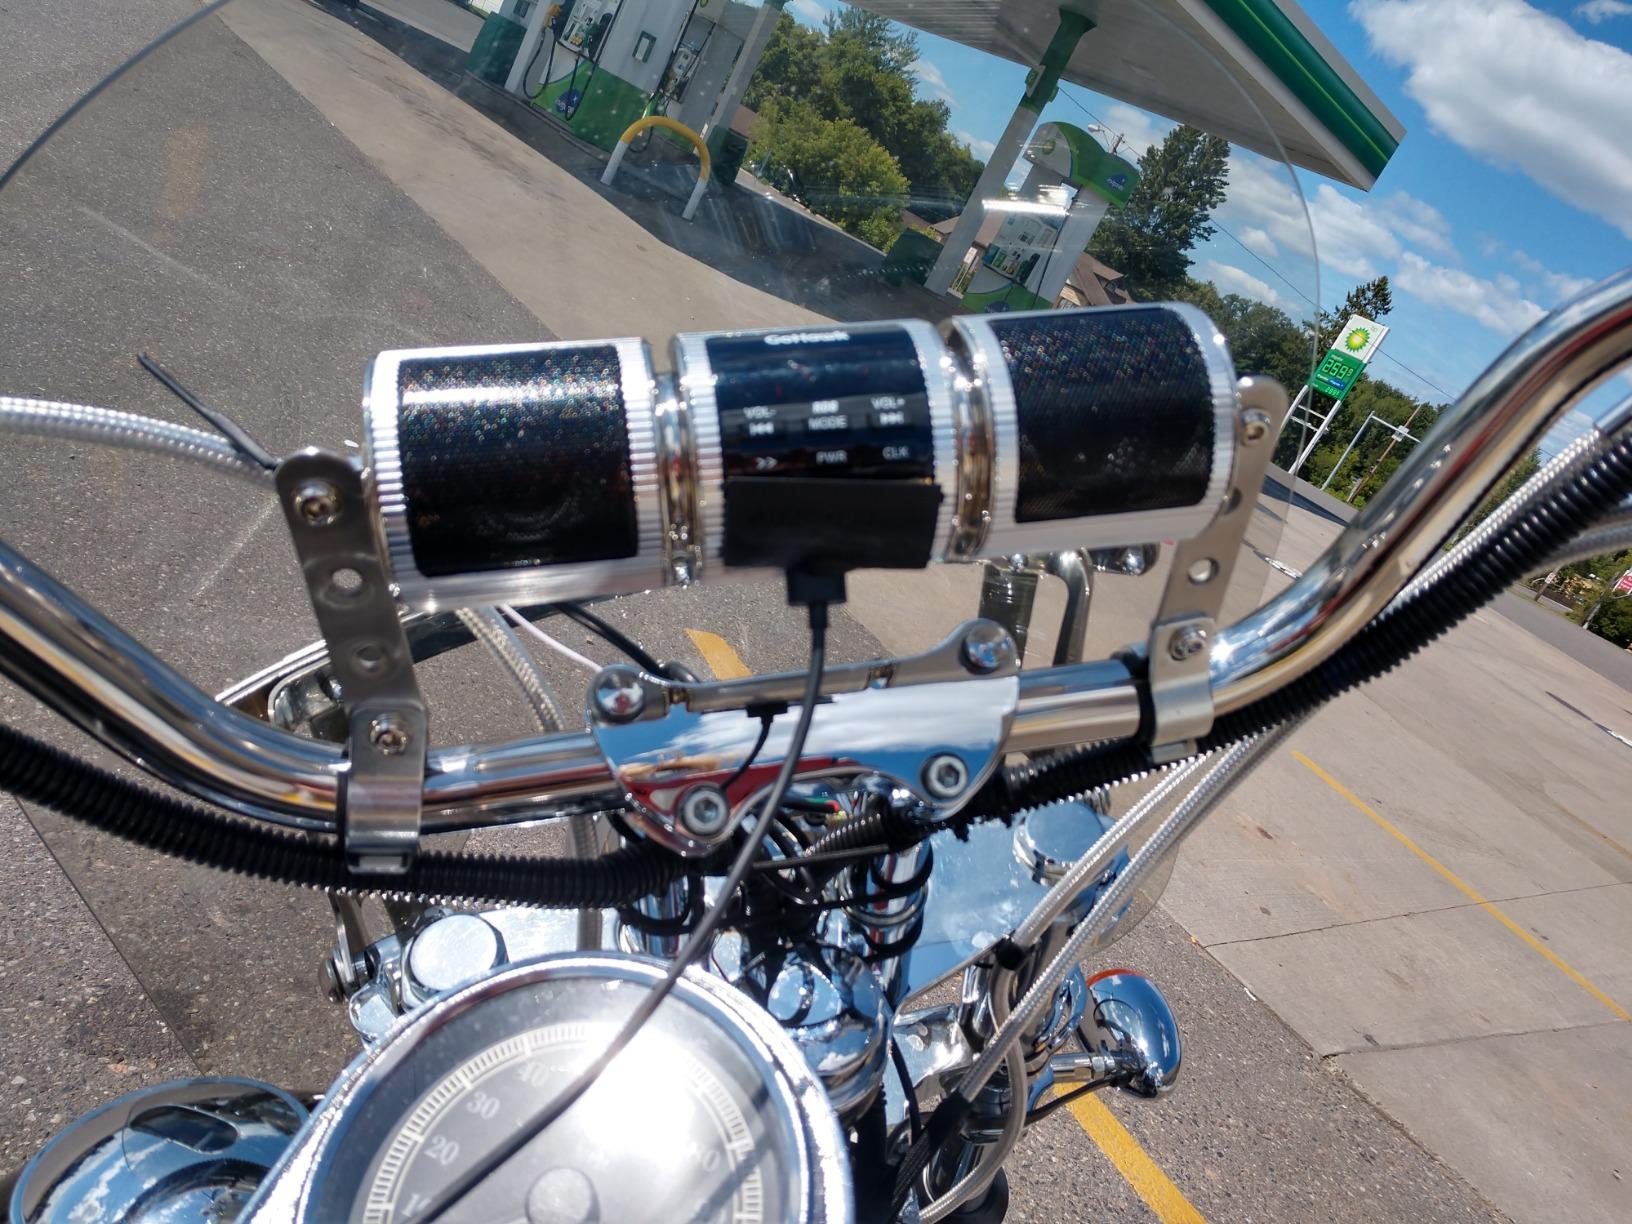 The Official Motorcycle Speaker photo review